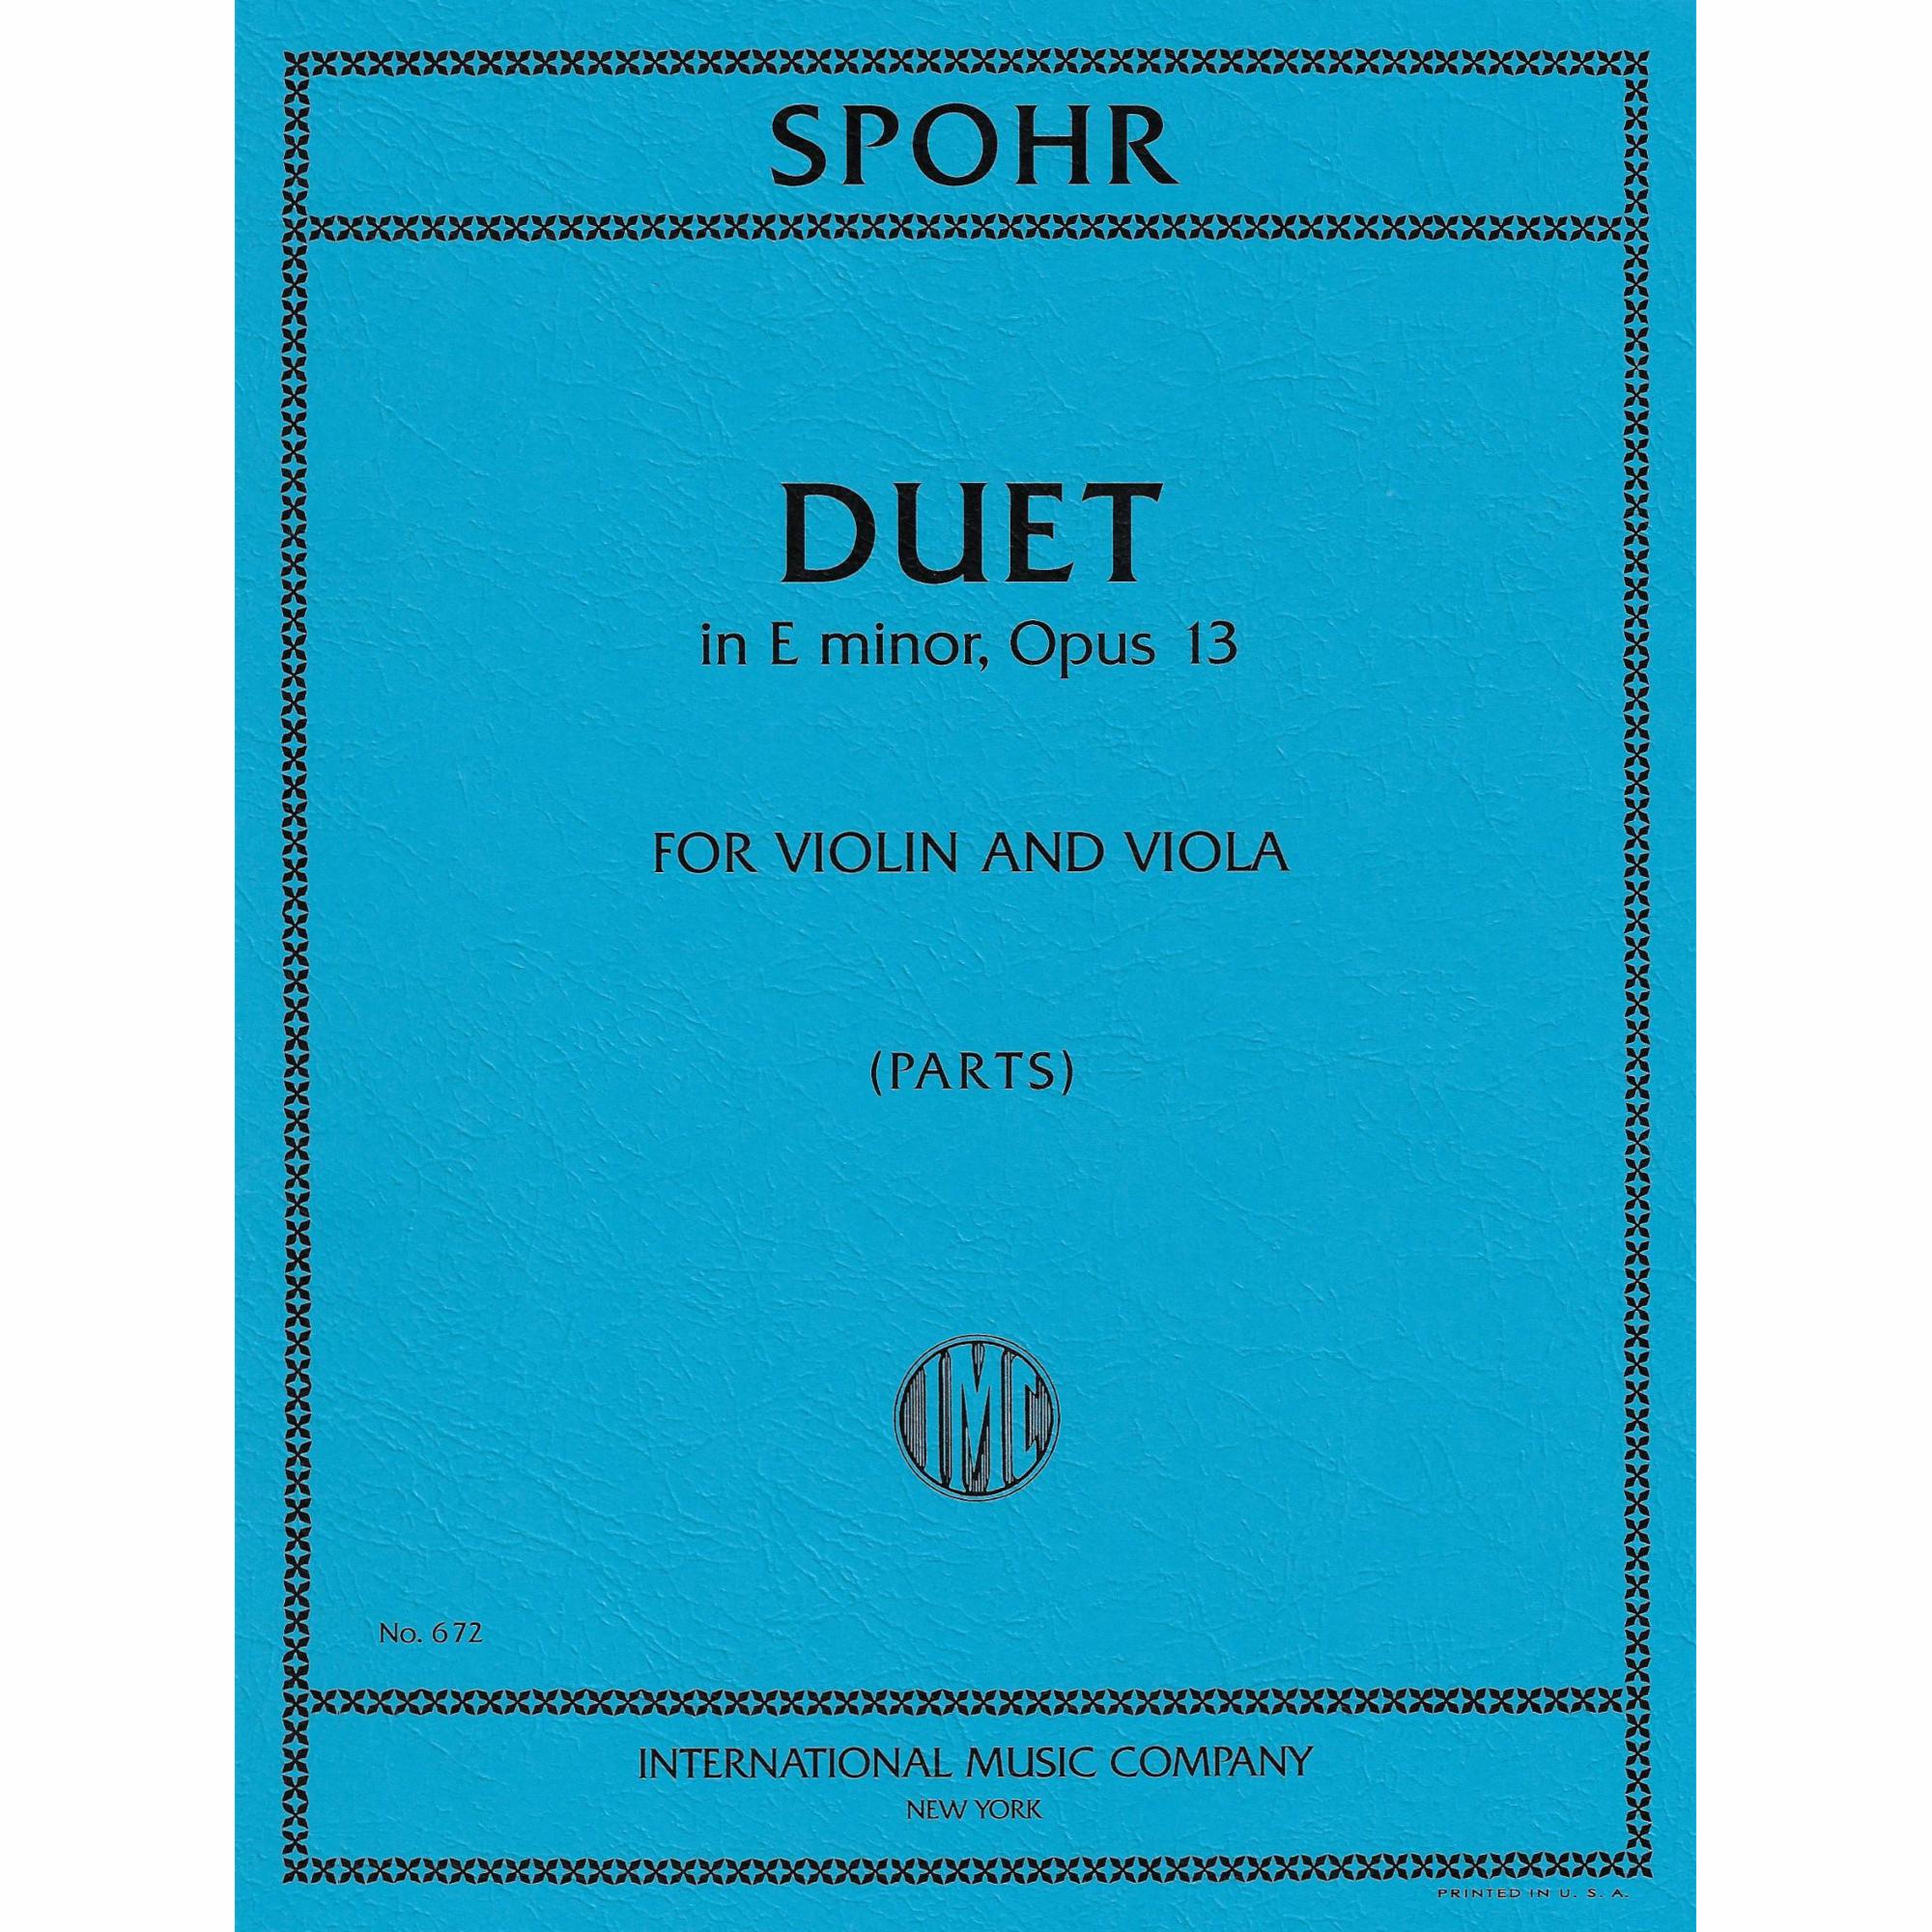 Spohr -- Duet in E Minor, Op. 13 for Violin and Viola